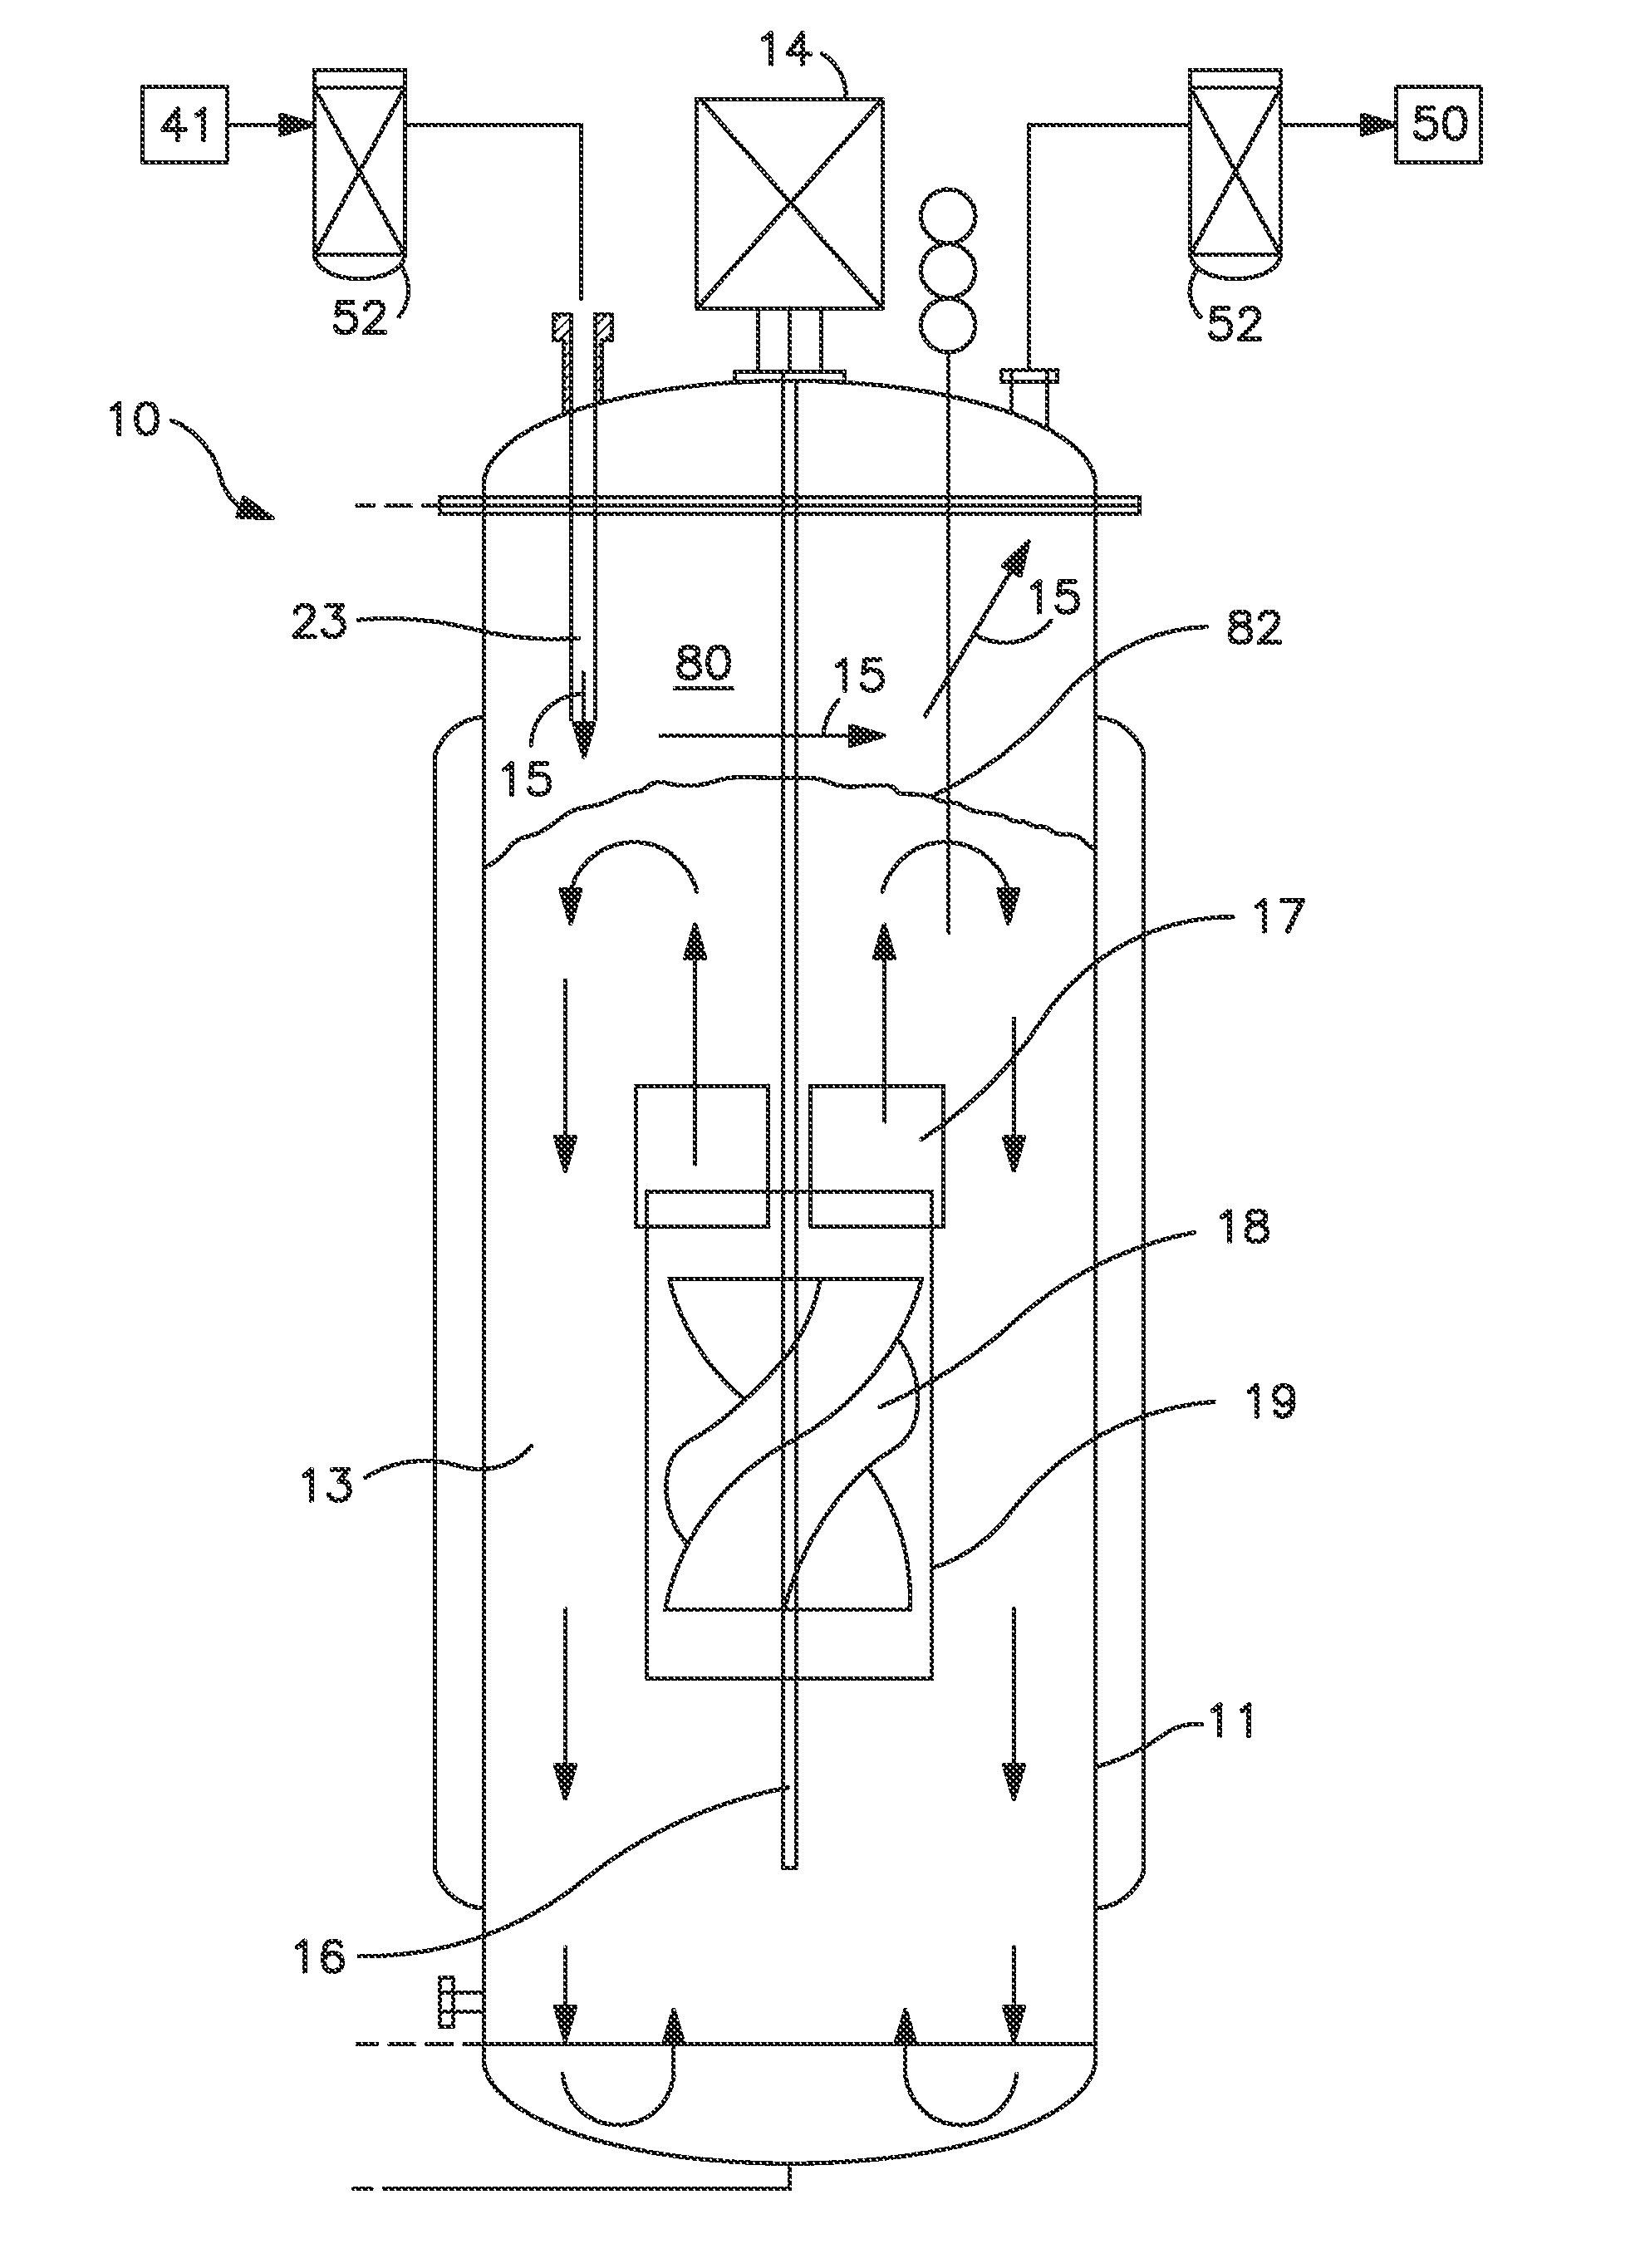 Bioreactor with upward flowing impeller system for use in a mammalian cell culture process